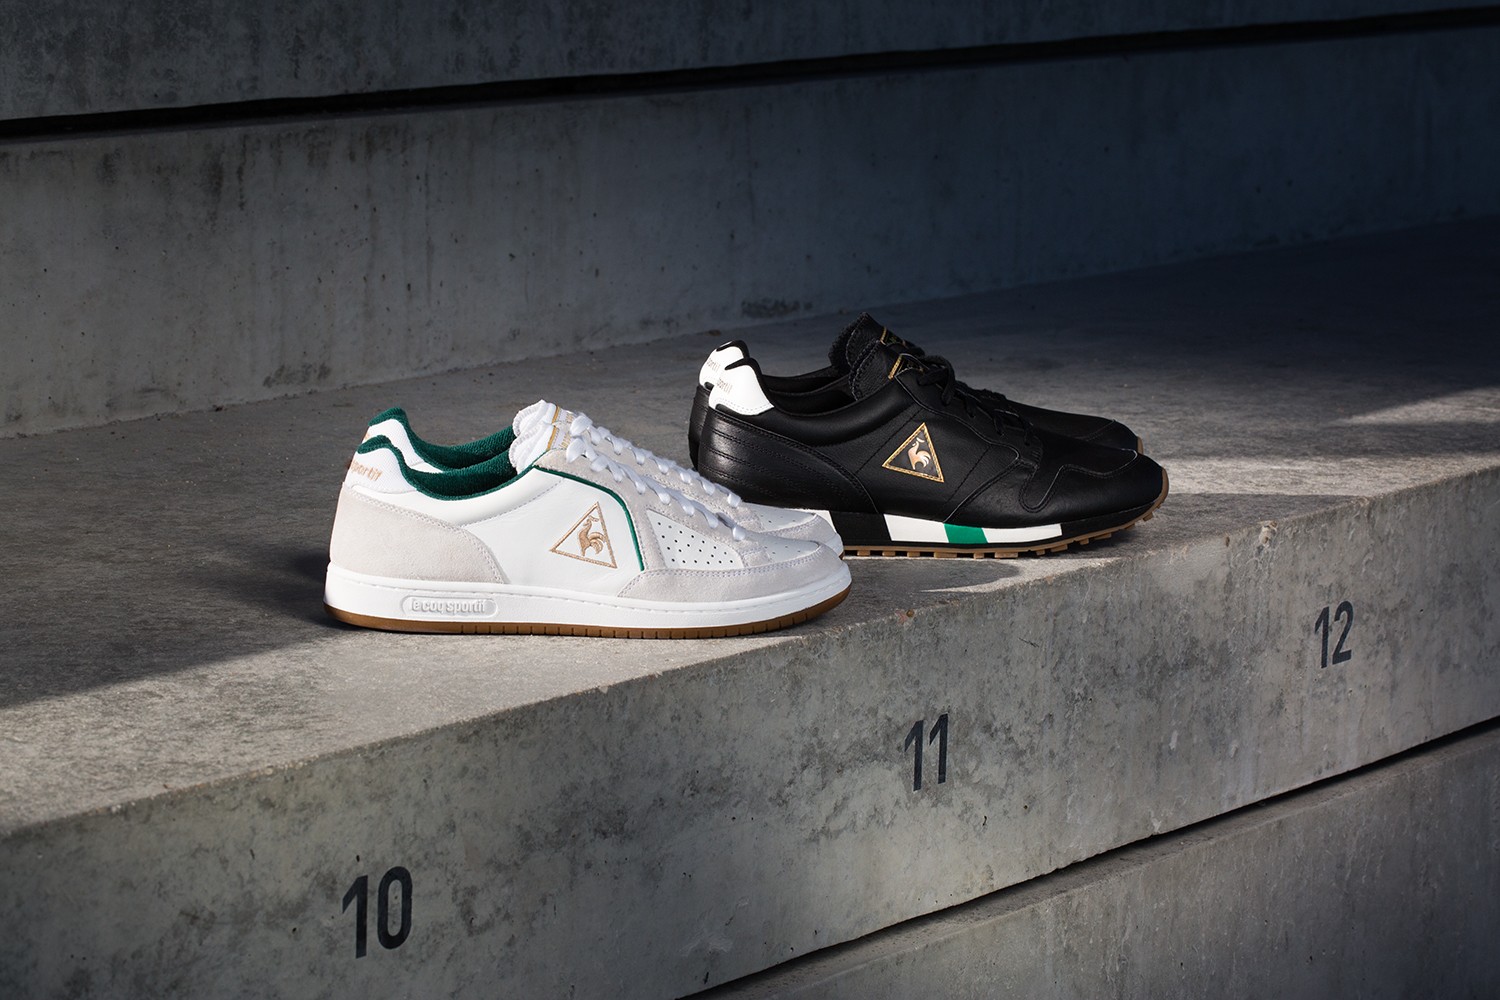 Le Coq Sportif – Supporters Pack